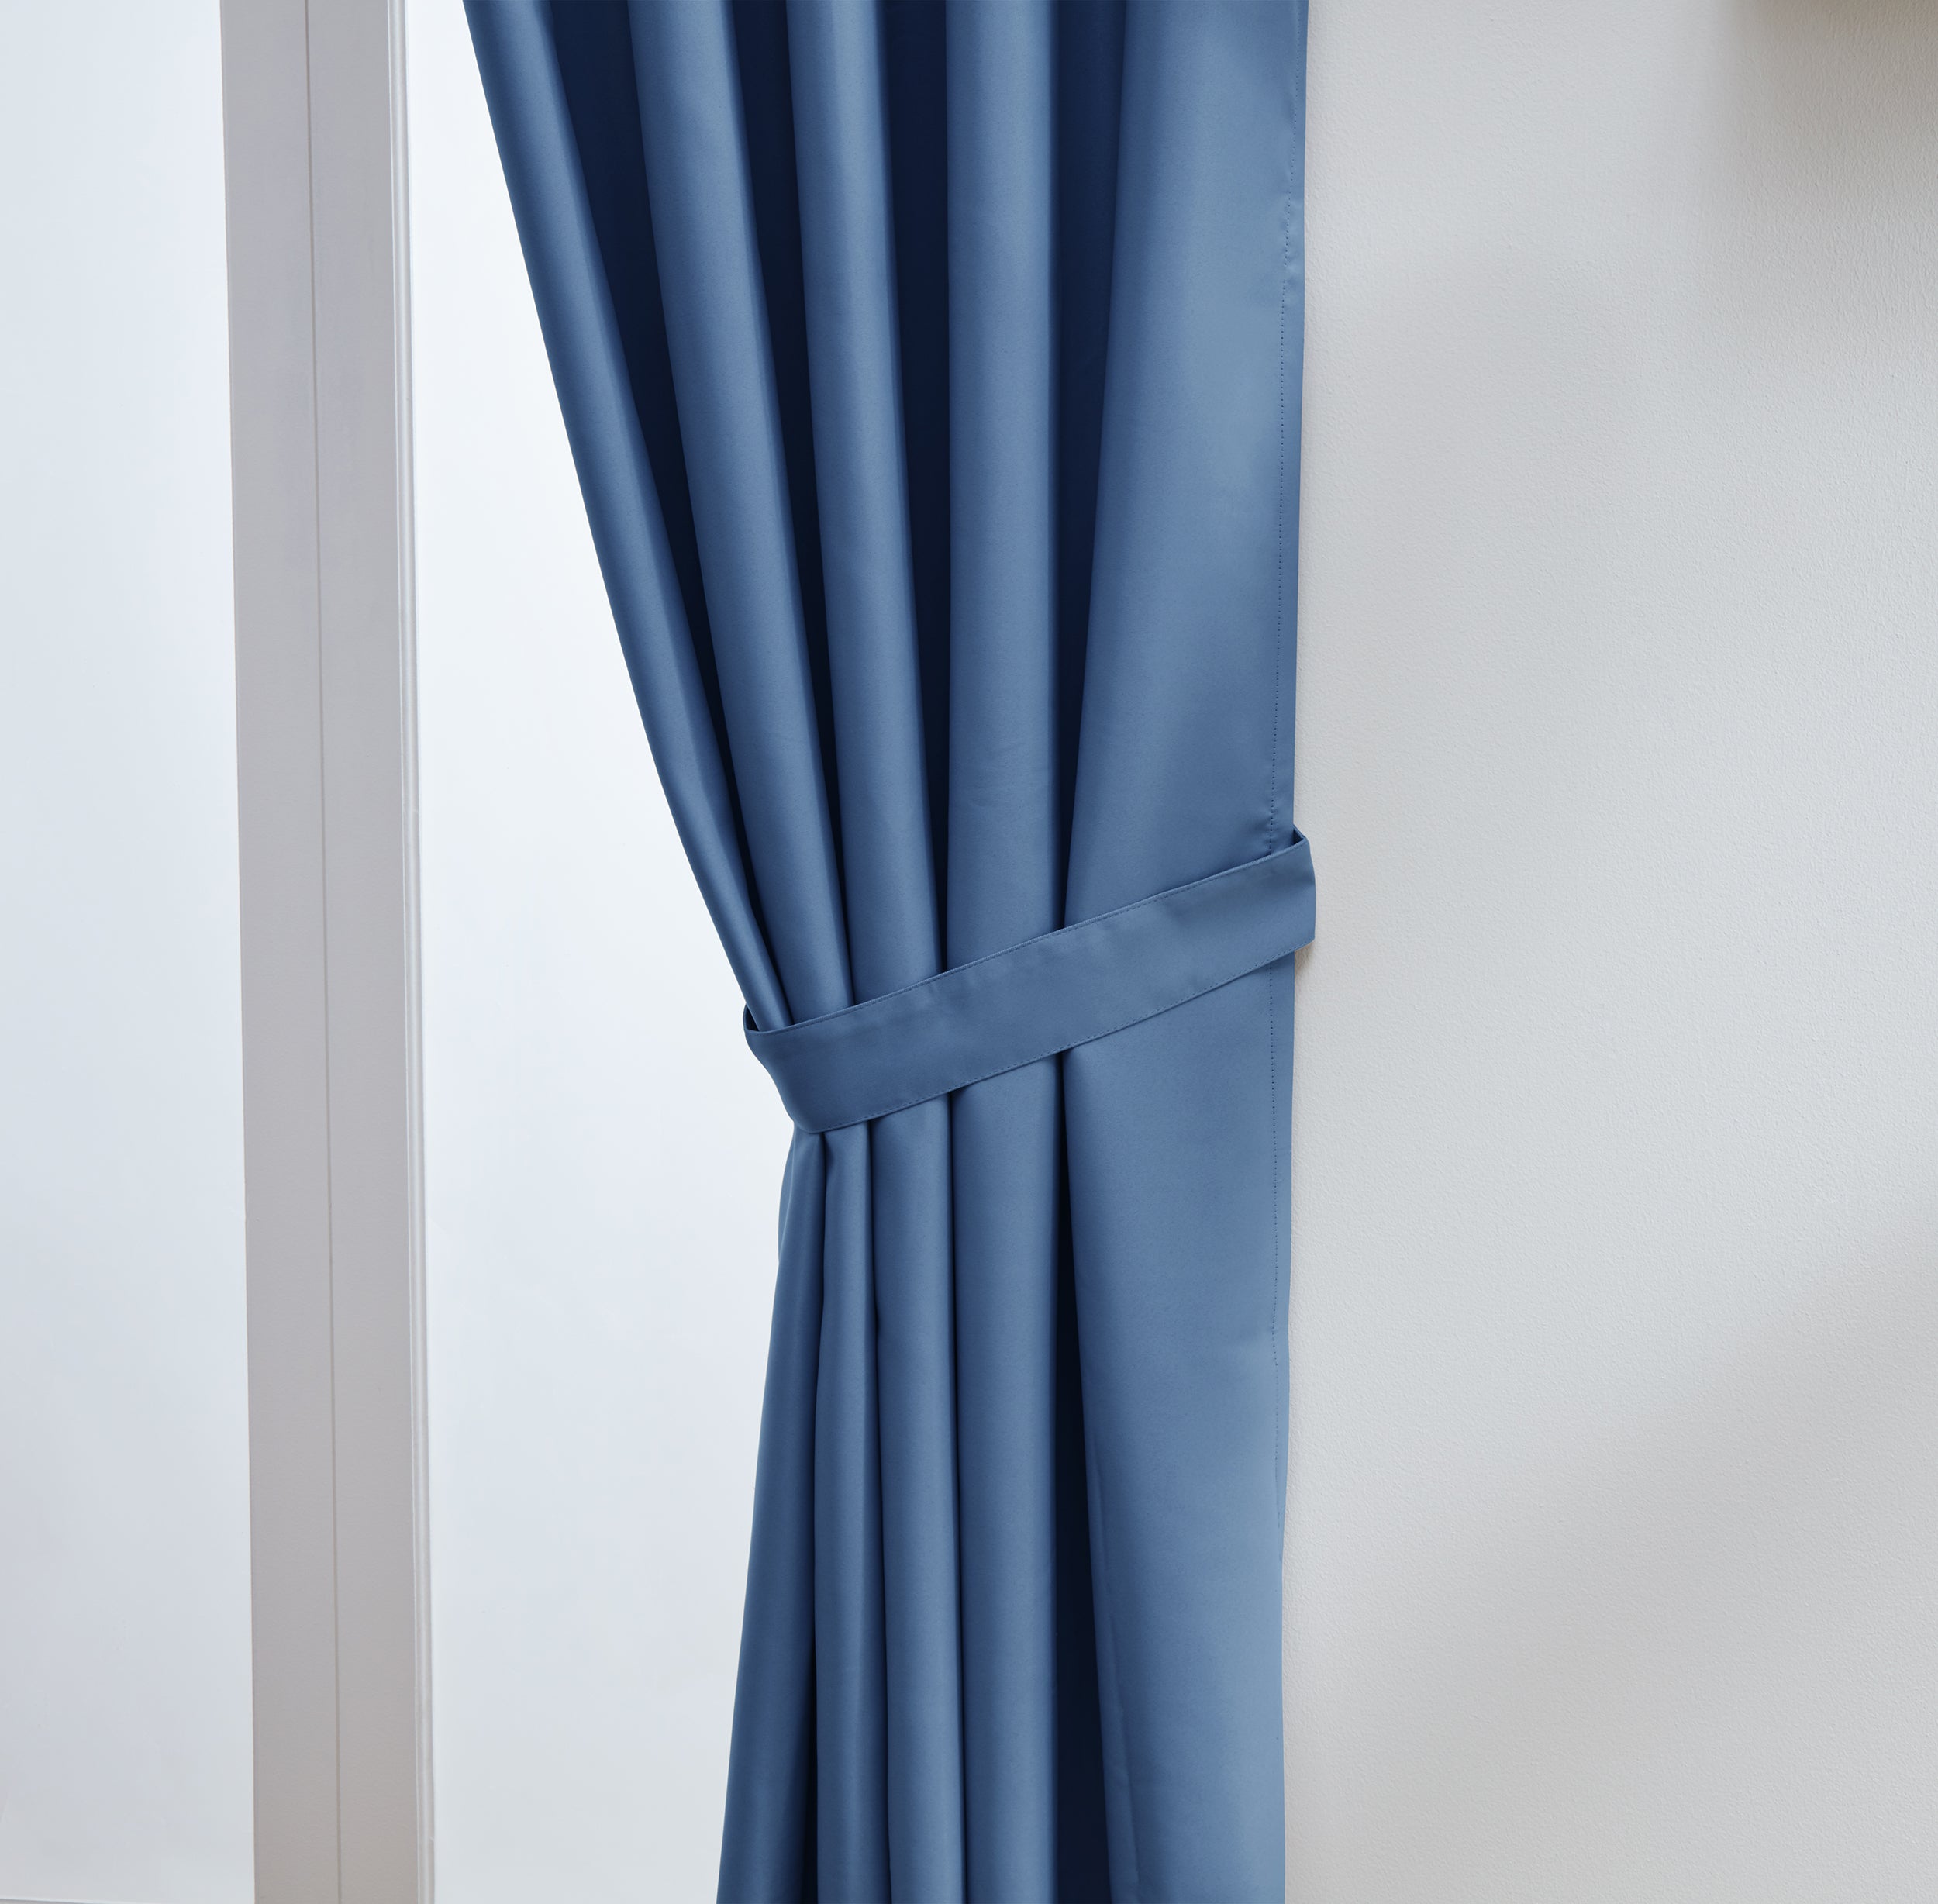 Thermal Blackout Ready Made Tape Top Curtains + Tie Backs (Blue)